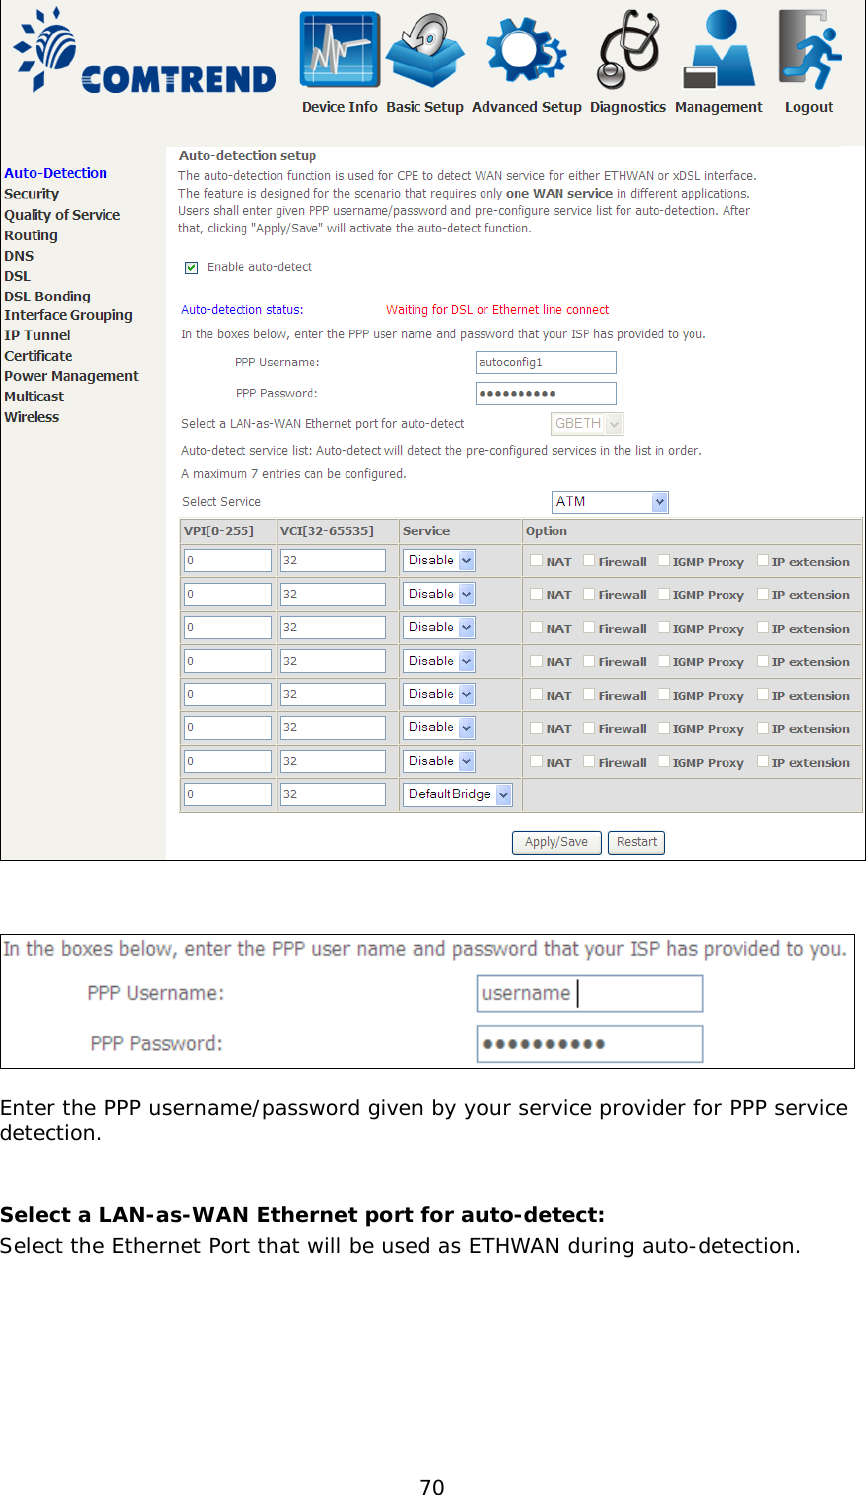  70        Enter the PPP username/password given by your service provider for PPP service detection.   Select a LAN-as-WAN Ethernet port for auto-detect: Select the Ethernet Port that will be used as ETHWAN during auto-detection. 